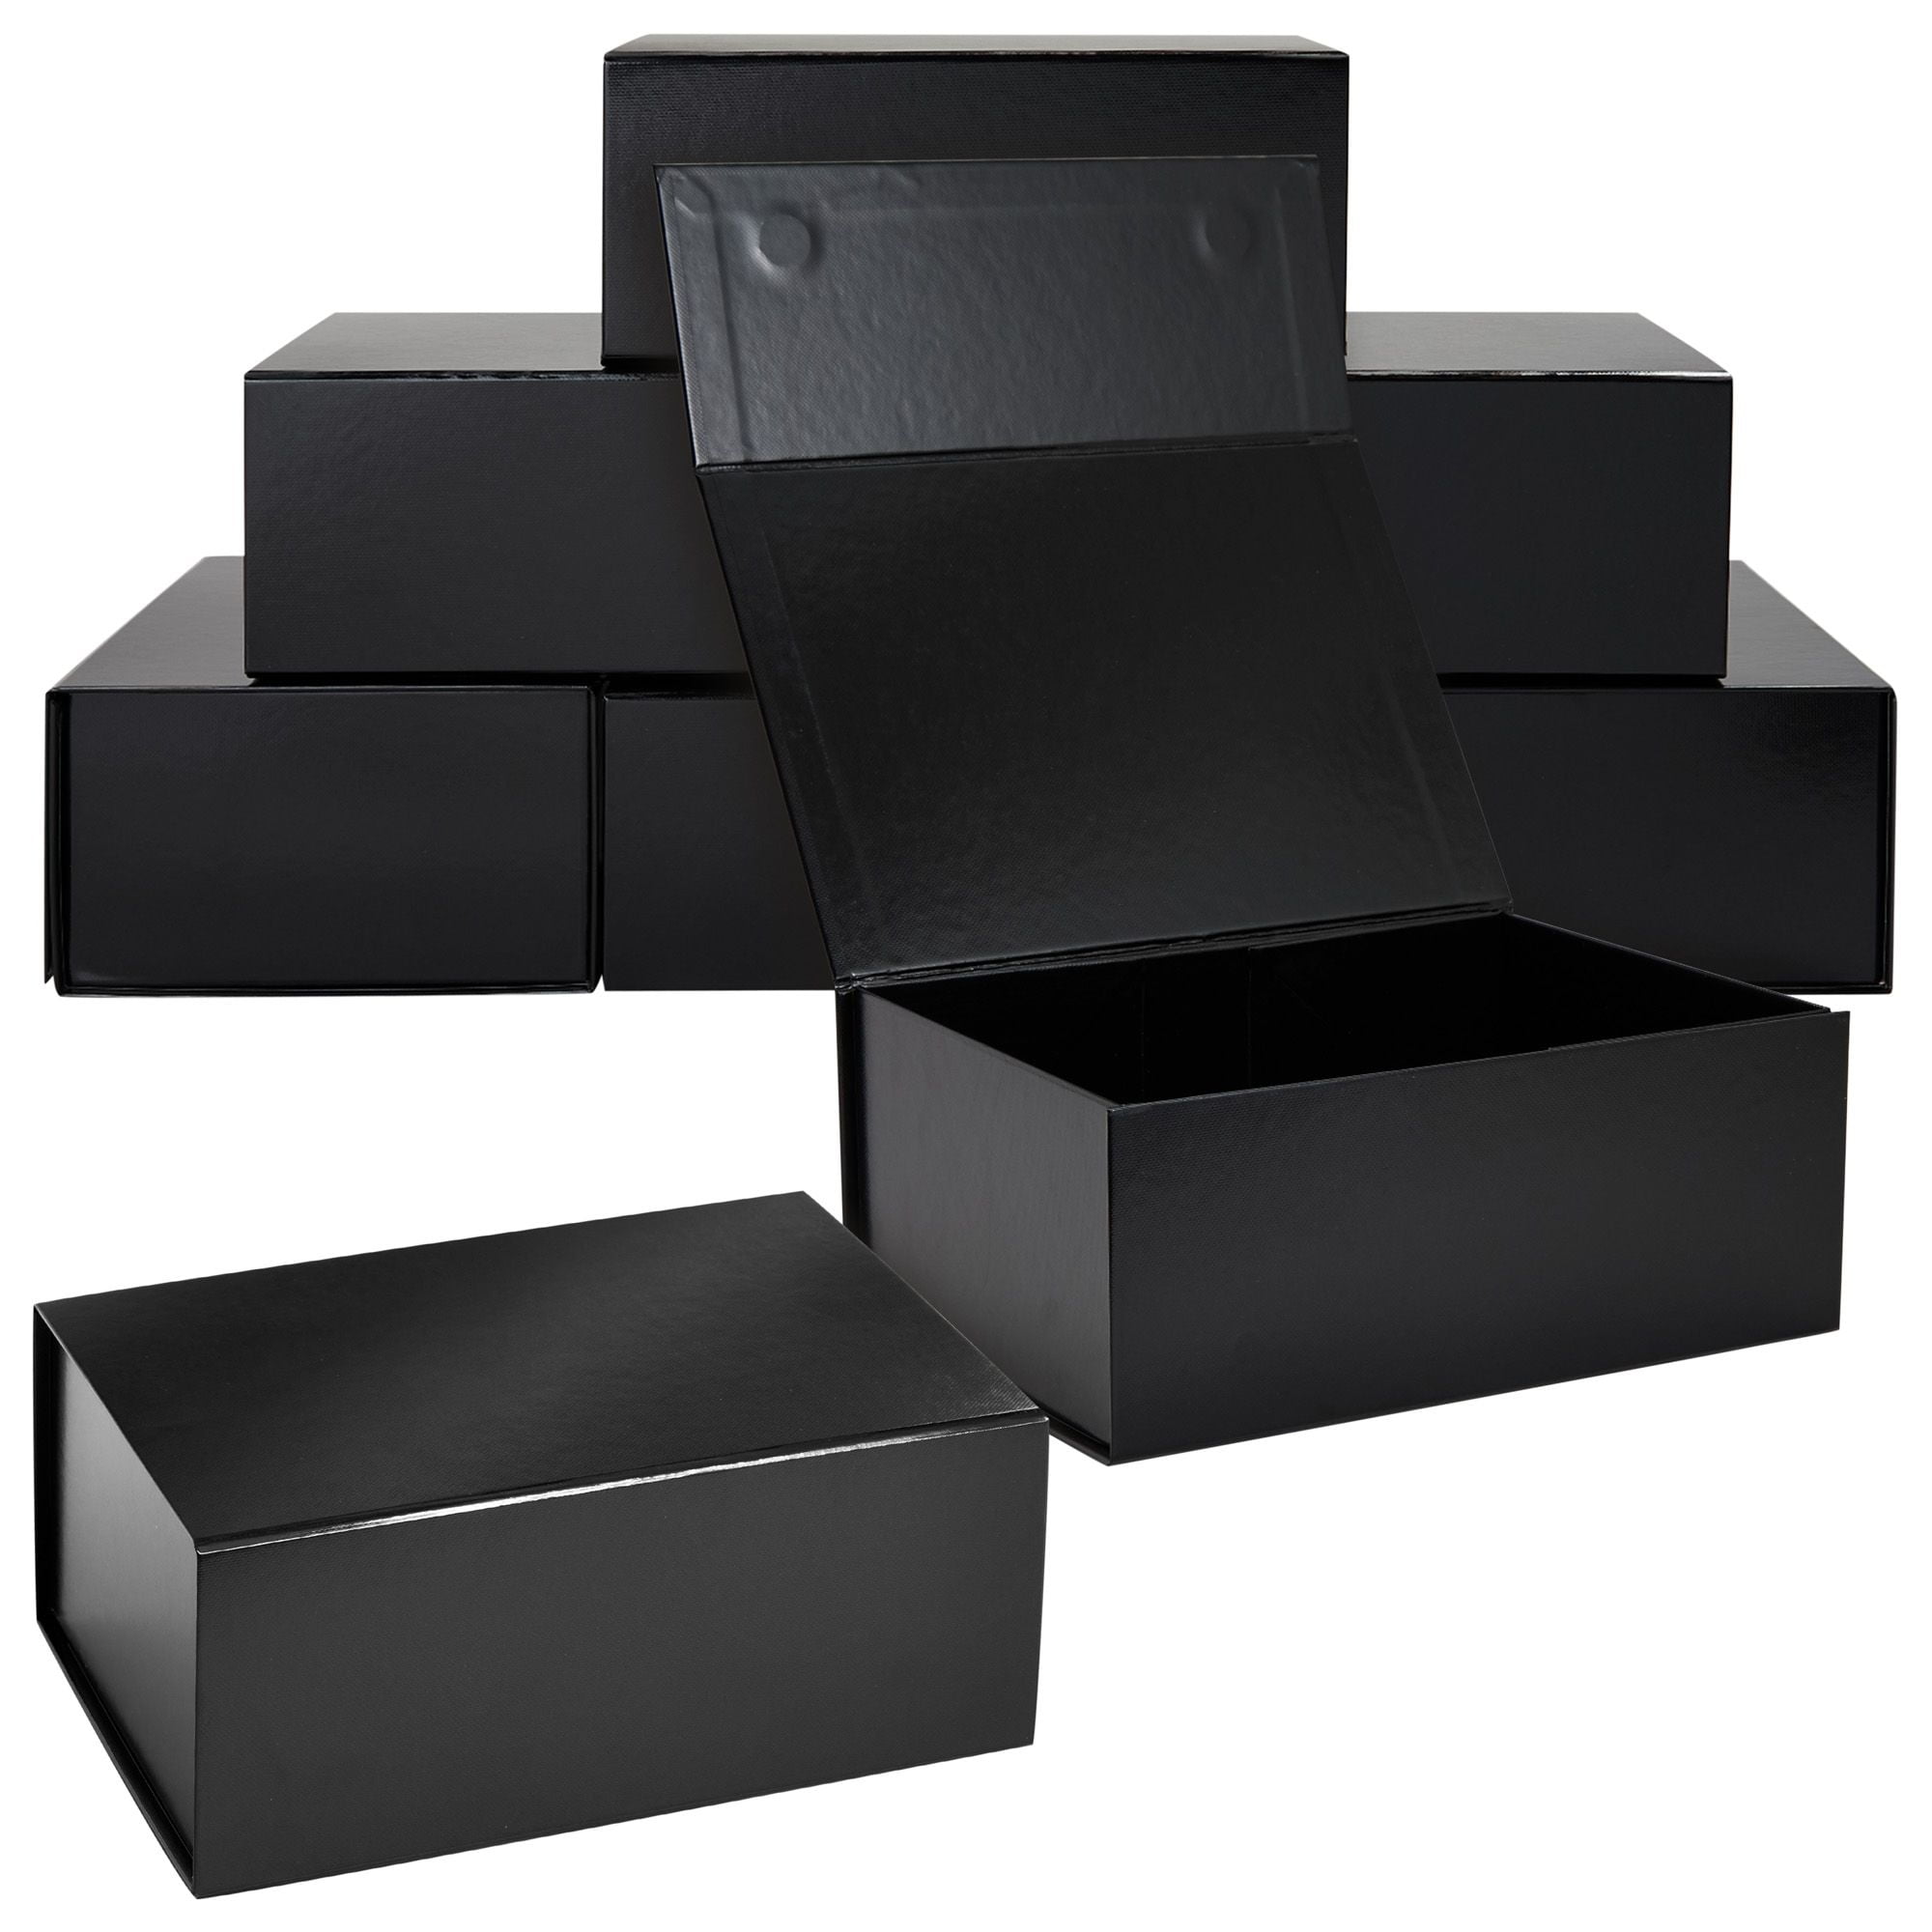 Aubiu Gift Boxes,Small Gift Boxes with Lids for Presents-Nesting Gift Boxes  Set of 4 Assorted Sizes Black Gift Boxes for Wedding Presents,Bridesmaid